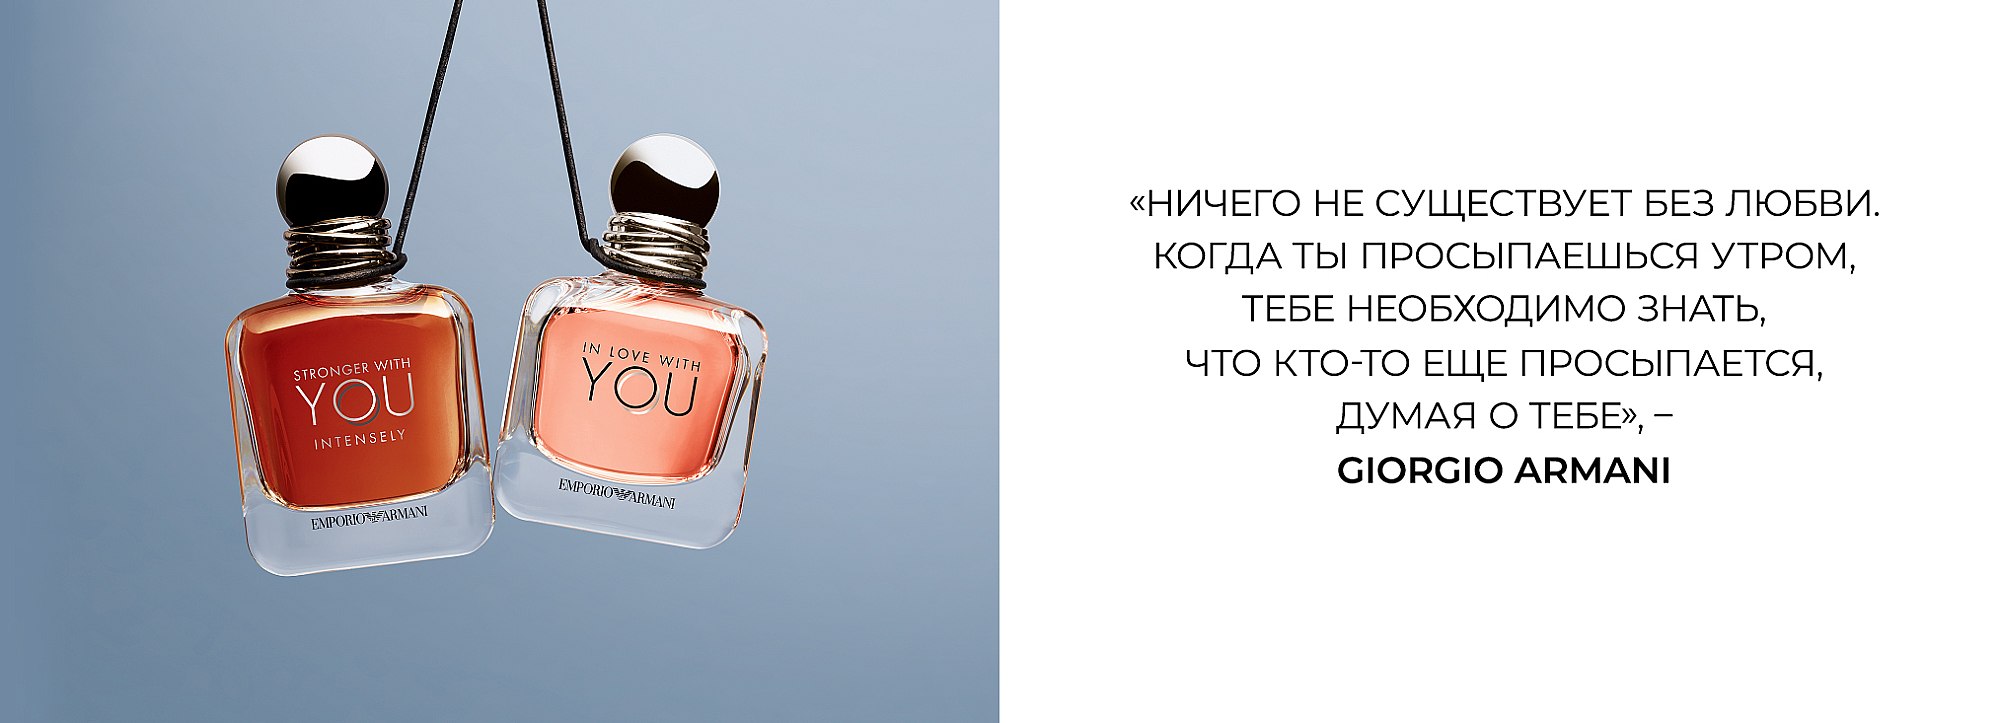 Stronger with you only. Armani stronger with you only. Armani only you. Armani stronger with you absolutely Рени.